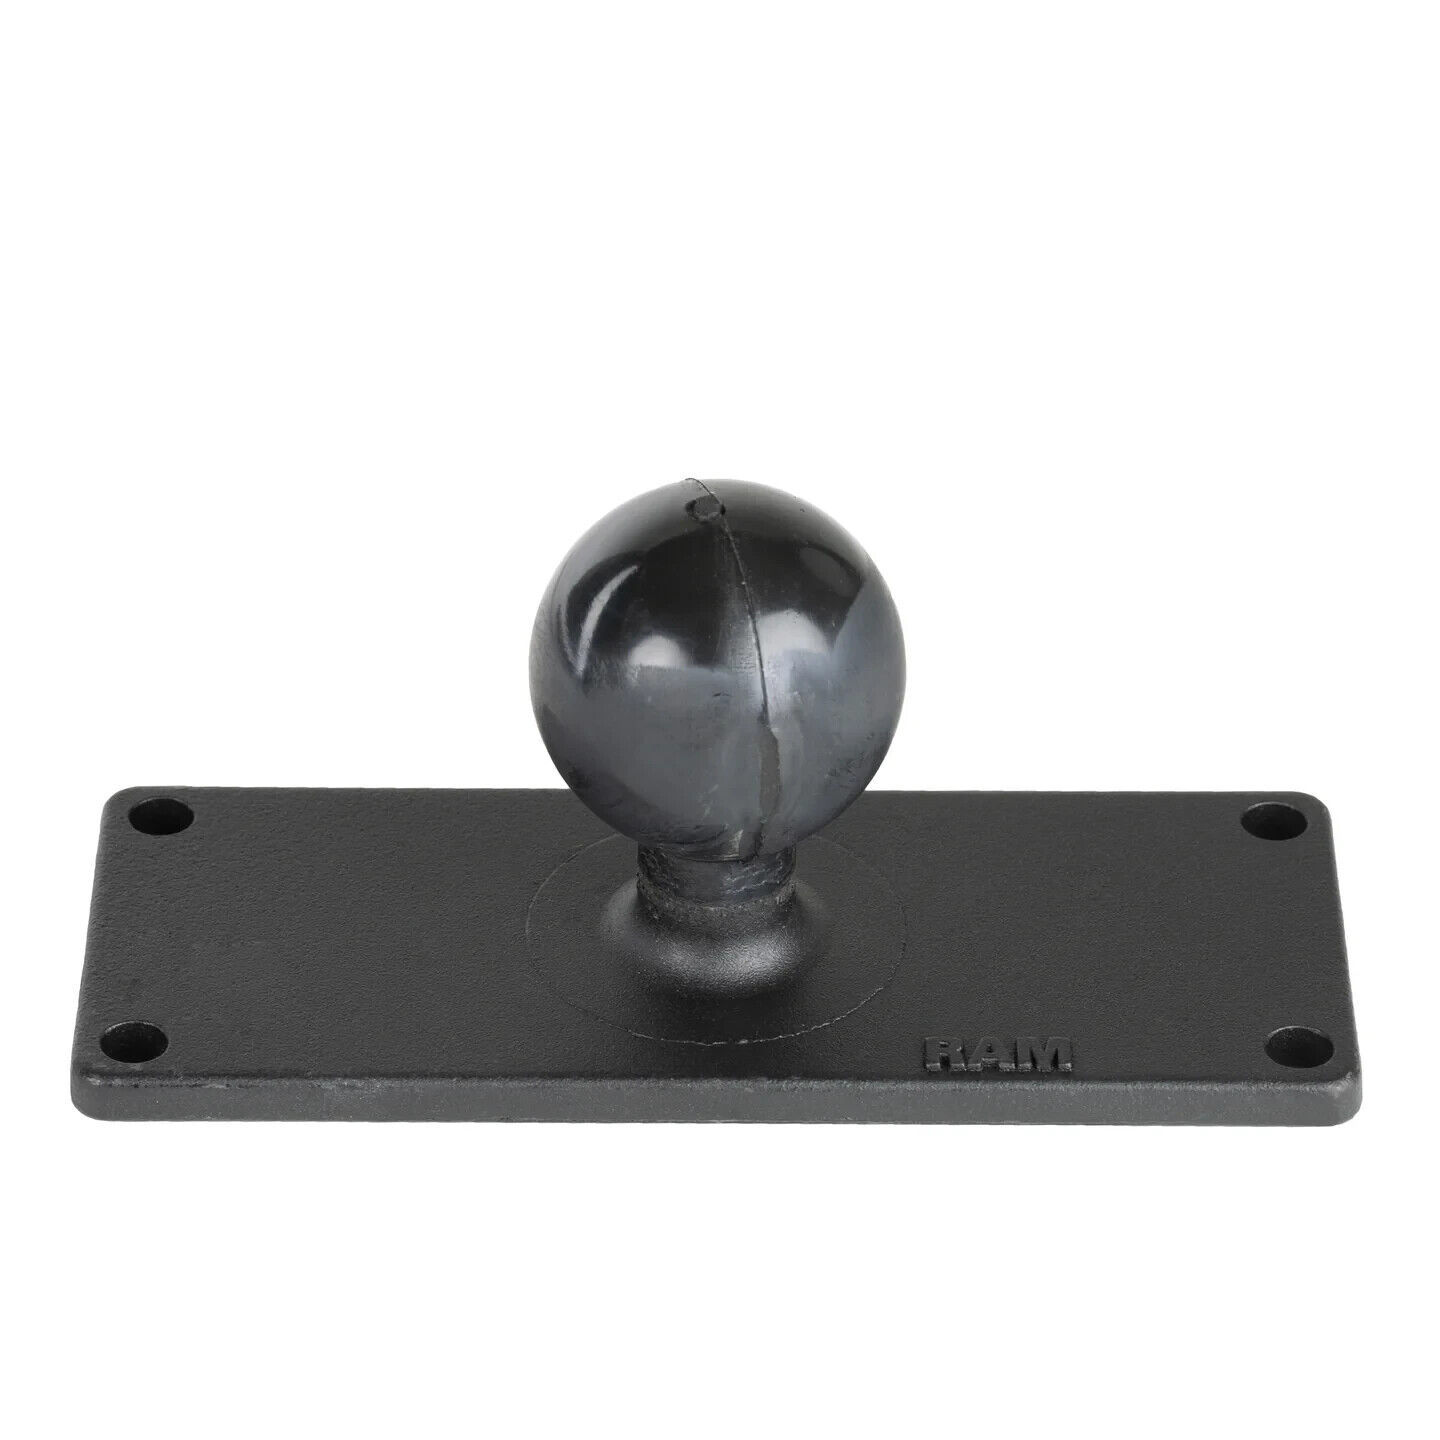 Primary image for RAM Mount Rectangular 2 x 5 inch Plate with 1.5 inch Ball RAM-202U-25